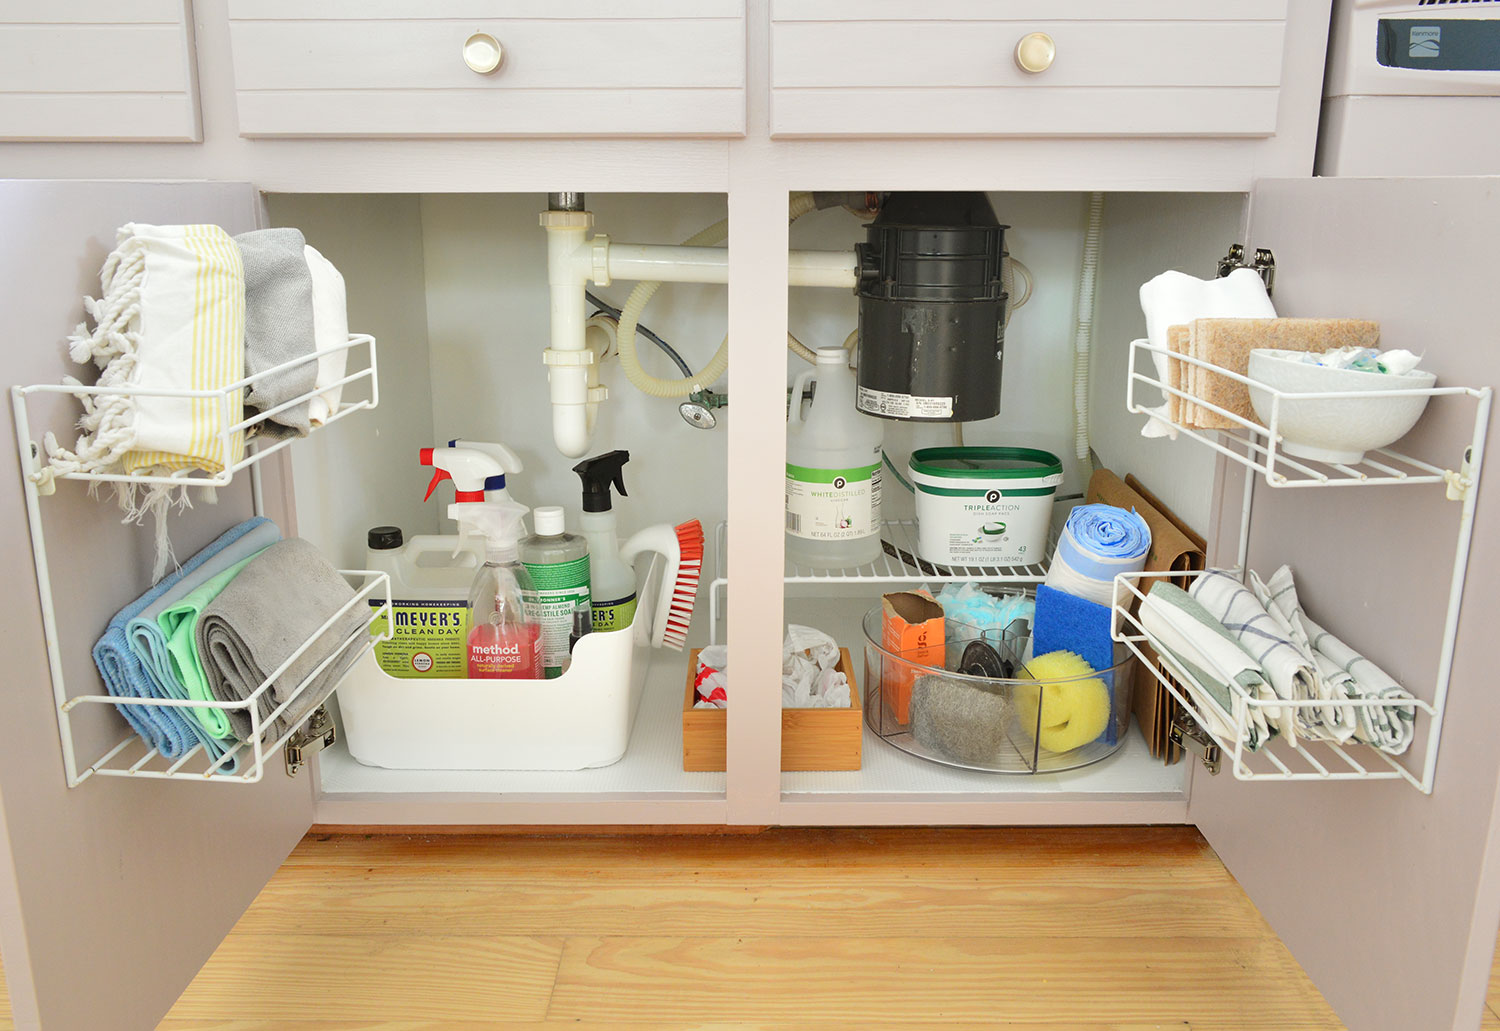 Quitd Under Shelf Pull Out Drawer Hiding Plastic Storage Drawer Organizer Cupboard Organiser Sliding Out Under Sink Cabinet Organiser Shelf Drawer For Kitchen Pantry Cupboards Cabinet Office 